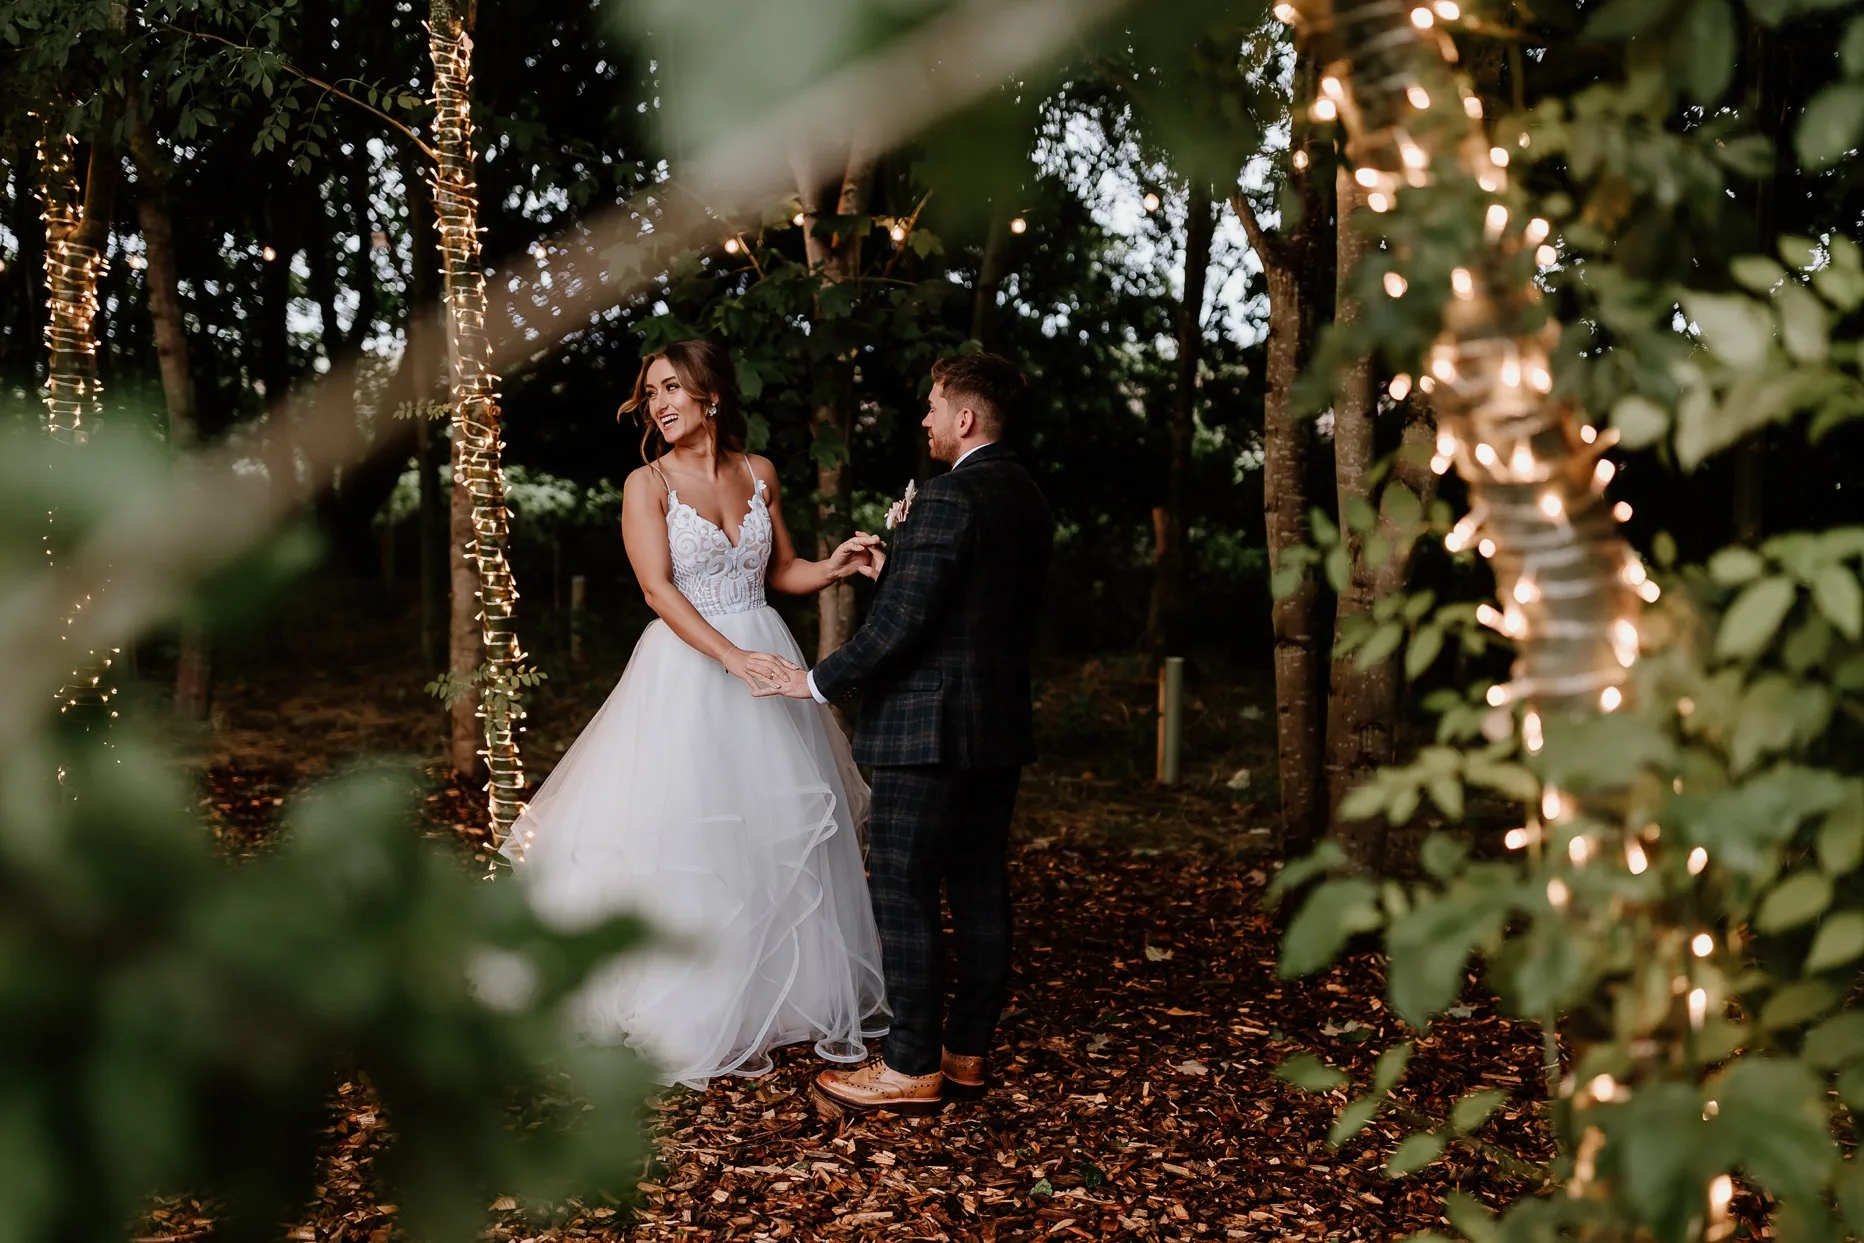 Bride and groom dancing in the woods surrounded by fairylights and trees.